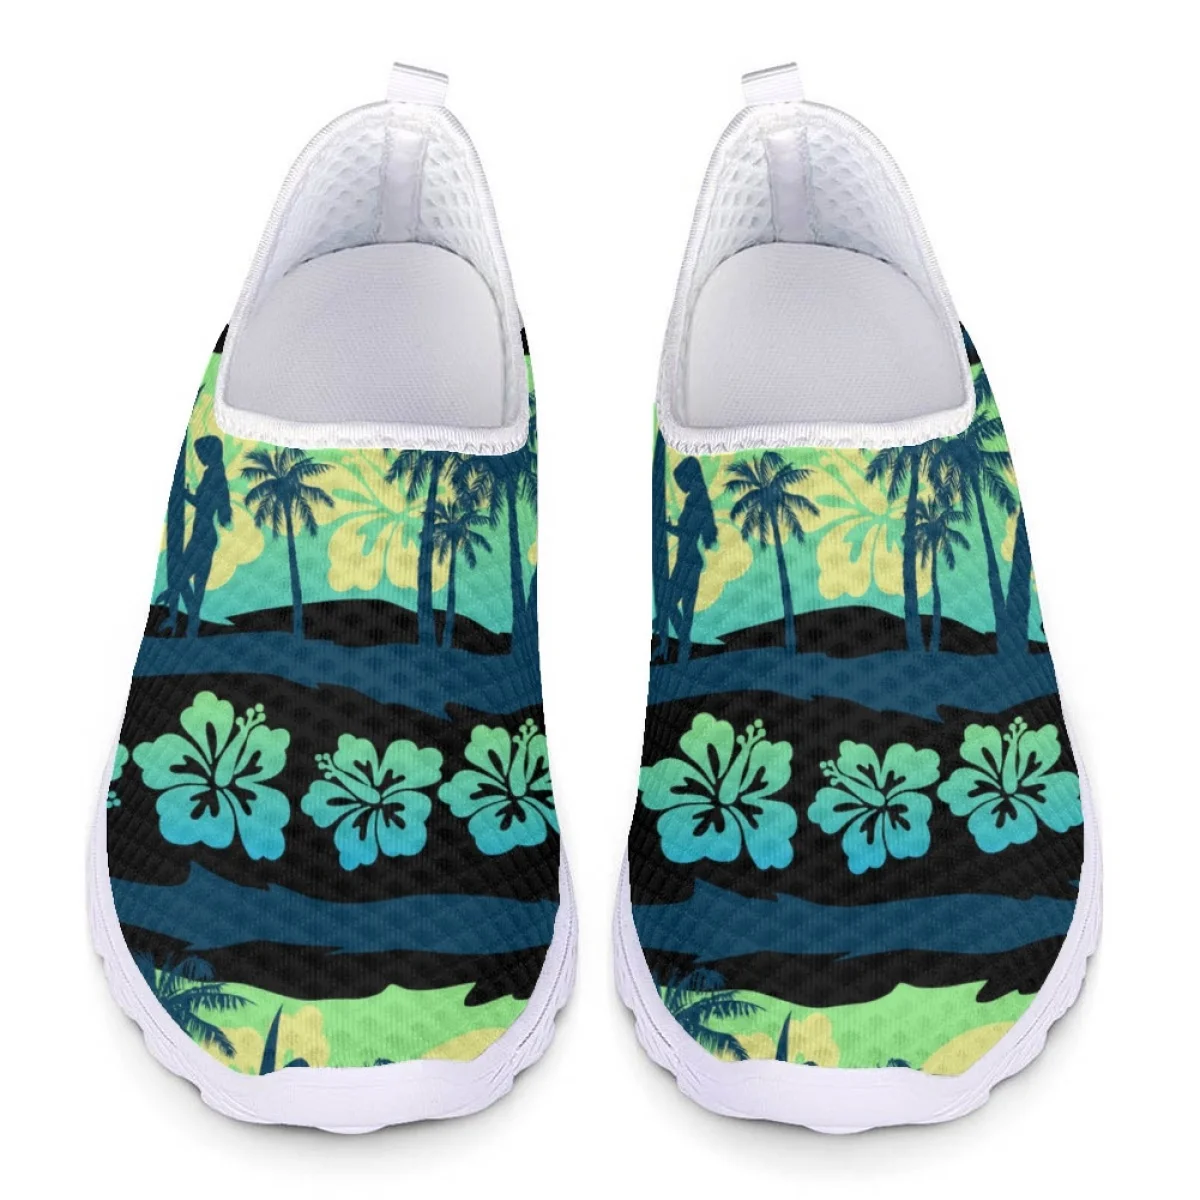 

Nopersonality Palm Trees Sneakers Shoes Ladies Summer Blue Tropical Surfing Mesh Running Shoe Durable One Pedal Breathable